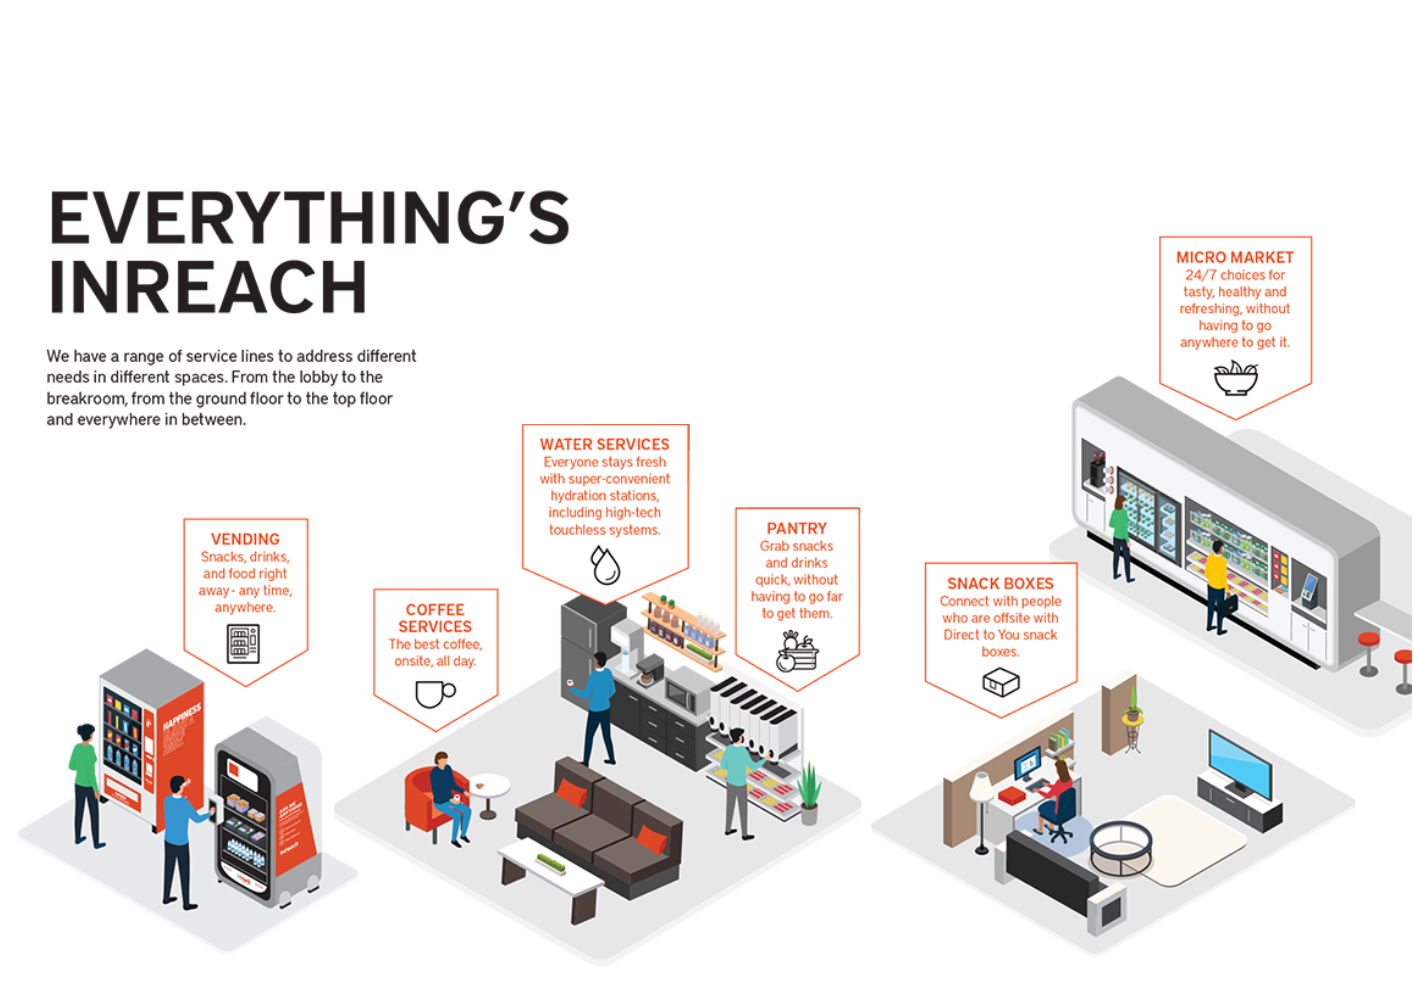 Graphic’s alt text says “Illustration of InReach Vending, Water Services, Coffee, Pantry, Micro Café, Aggregation, Micro Market and Snack Boxes